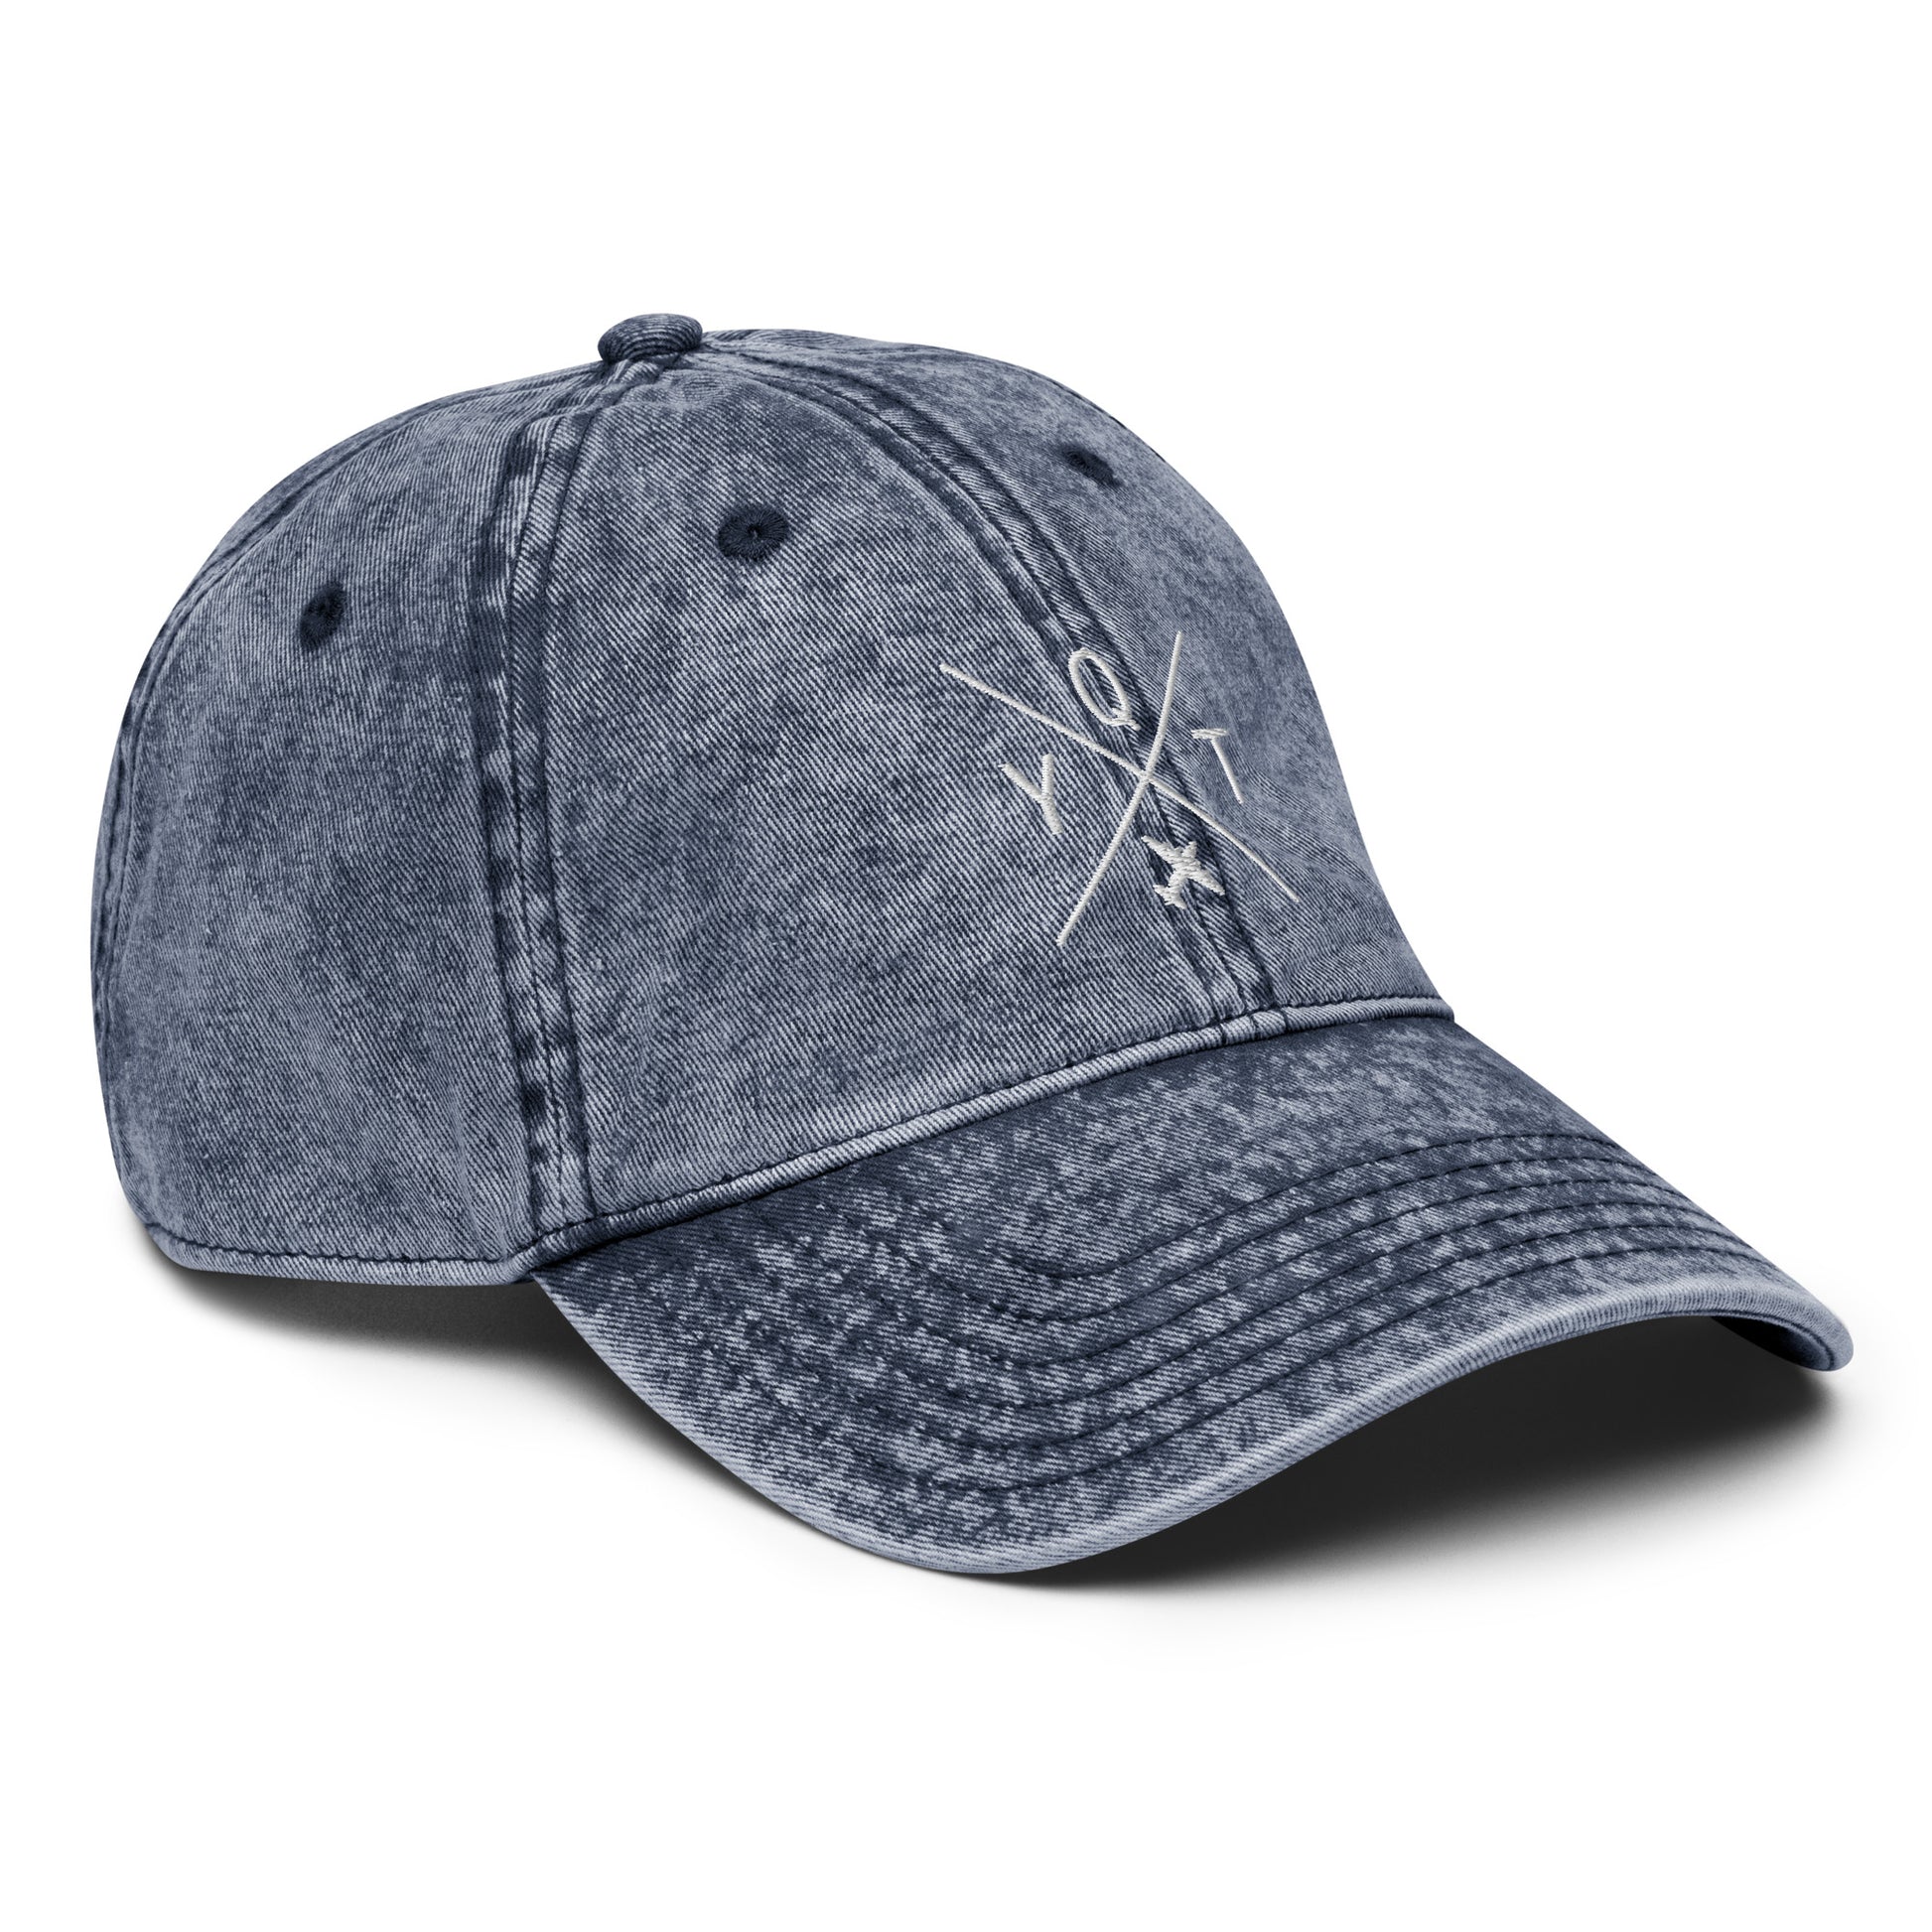 Crossed-X Cotton Twill Cap - White • YQT Thunder Bay • YHM Designs - Image 21